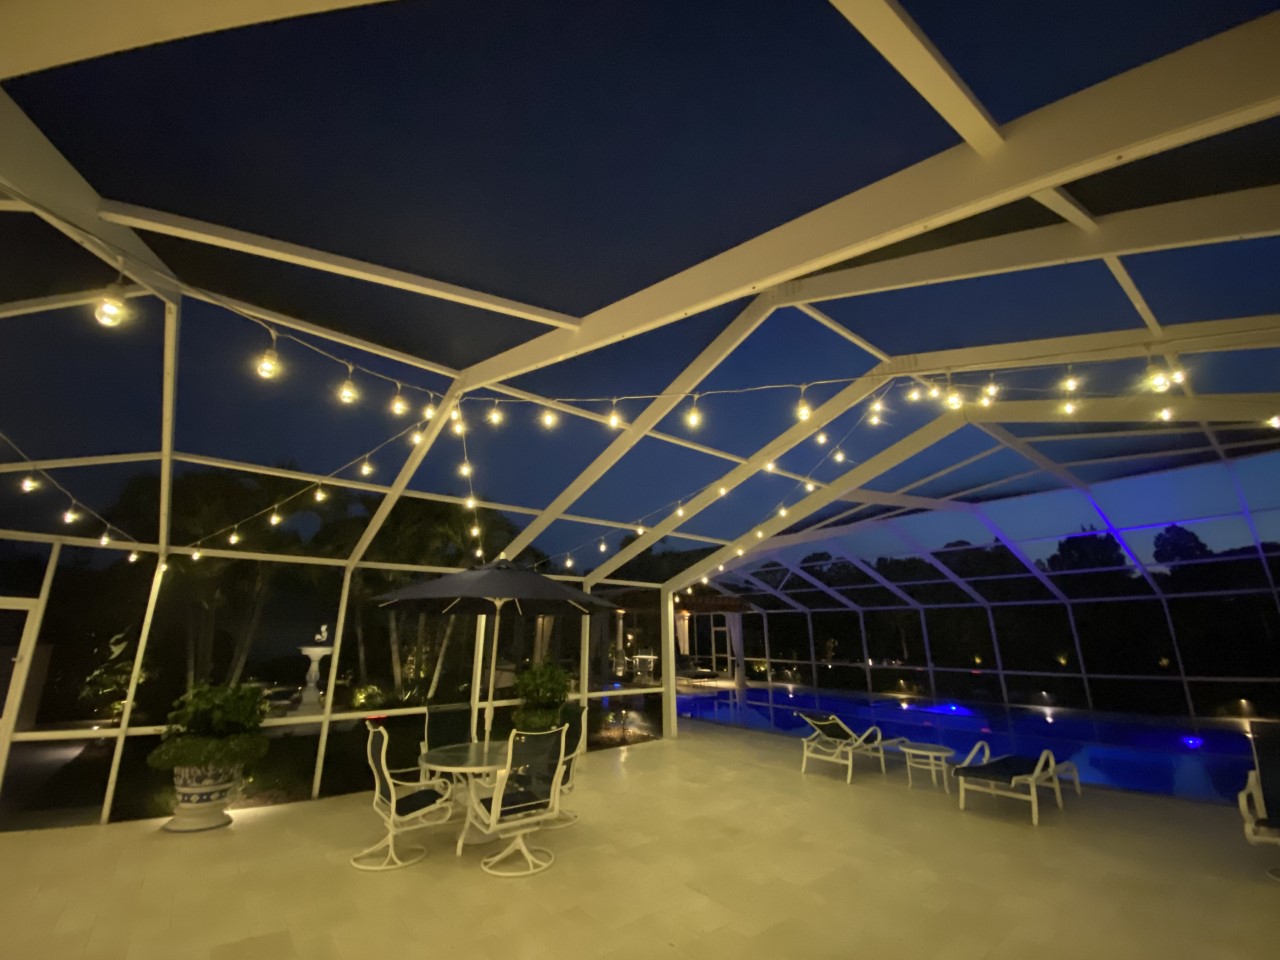 Can I Hang Outdoor Lights In My Lanai?